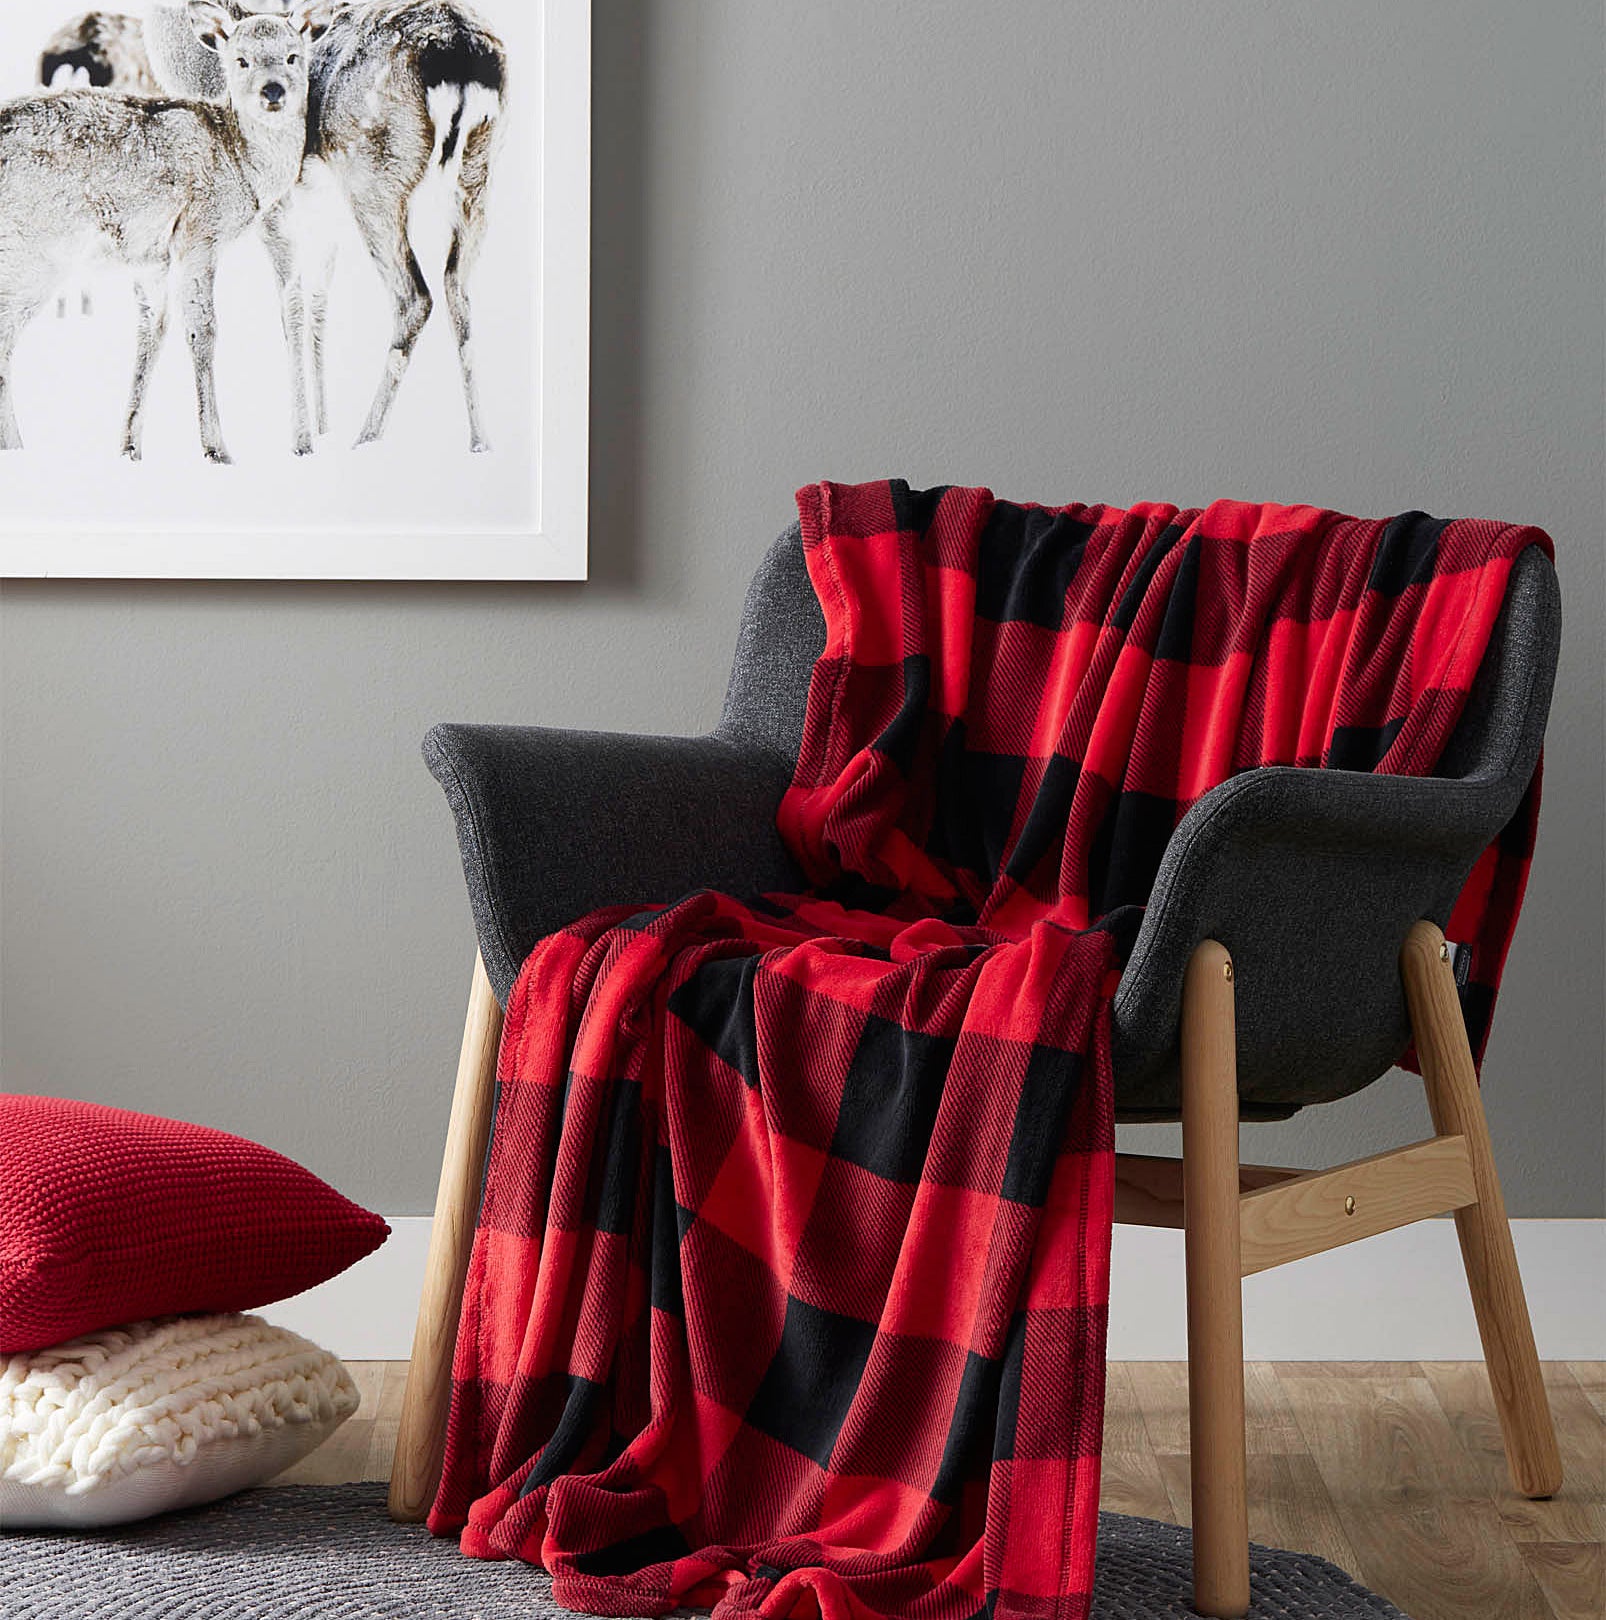 A soft throw blanket is draped over a wooden chair